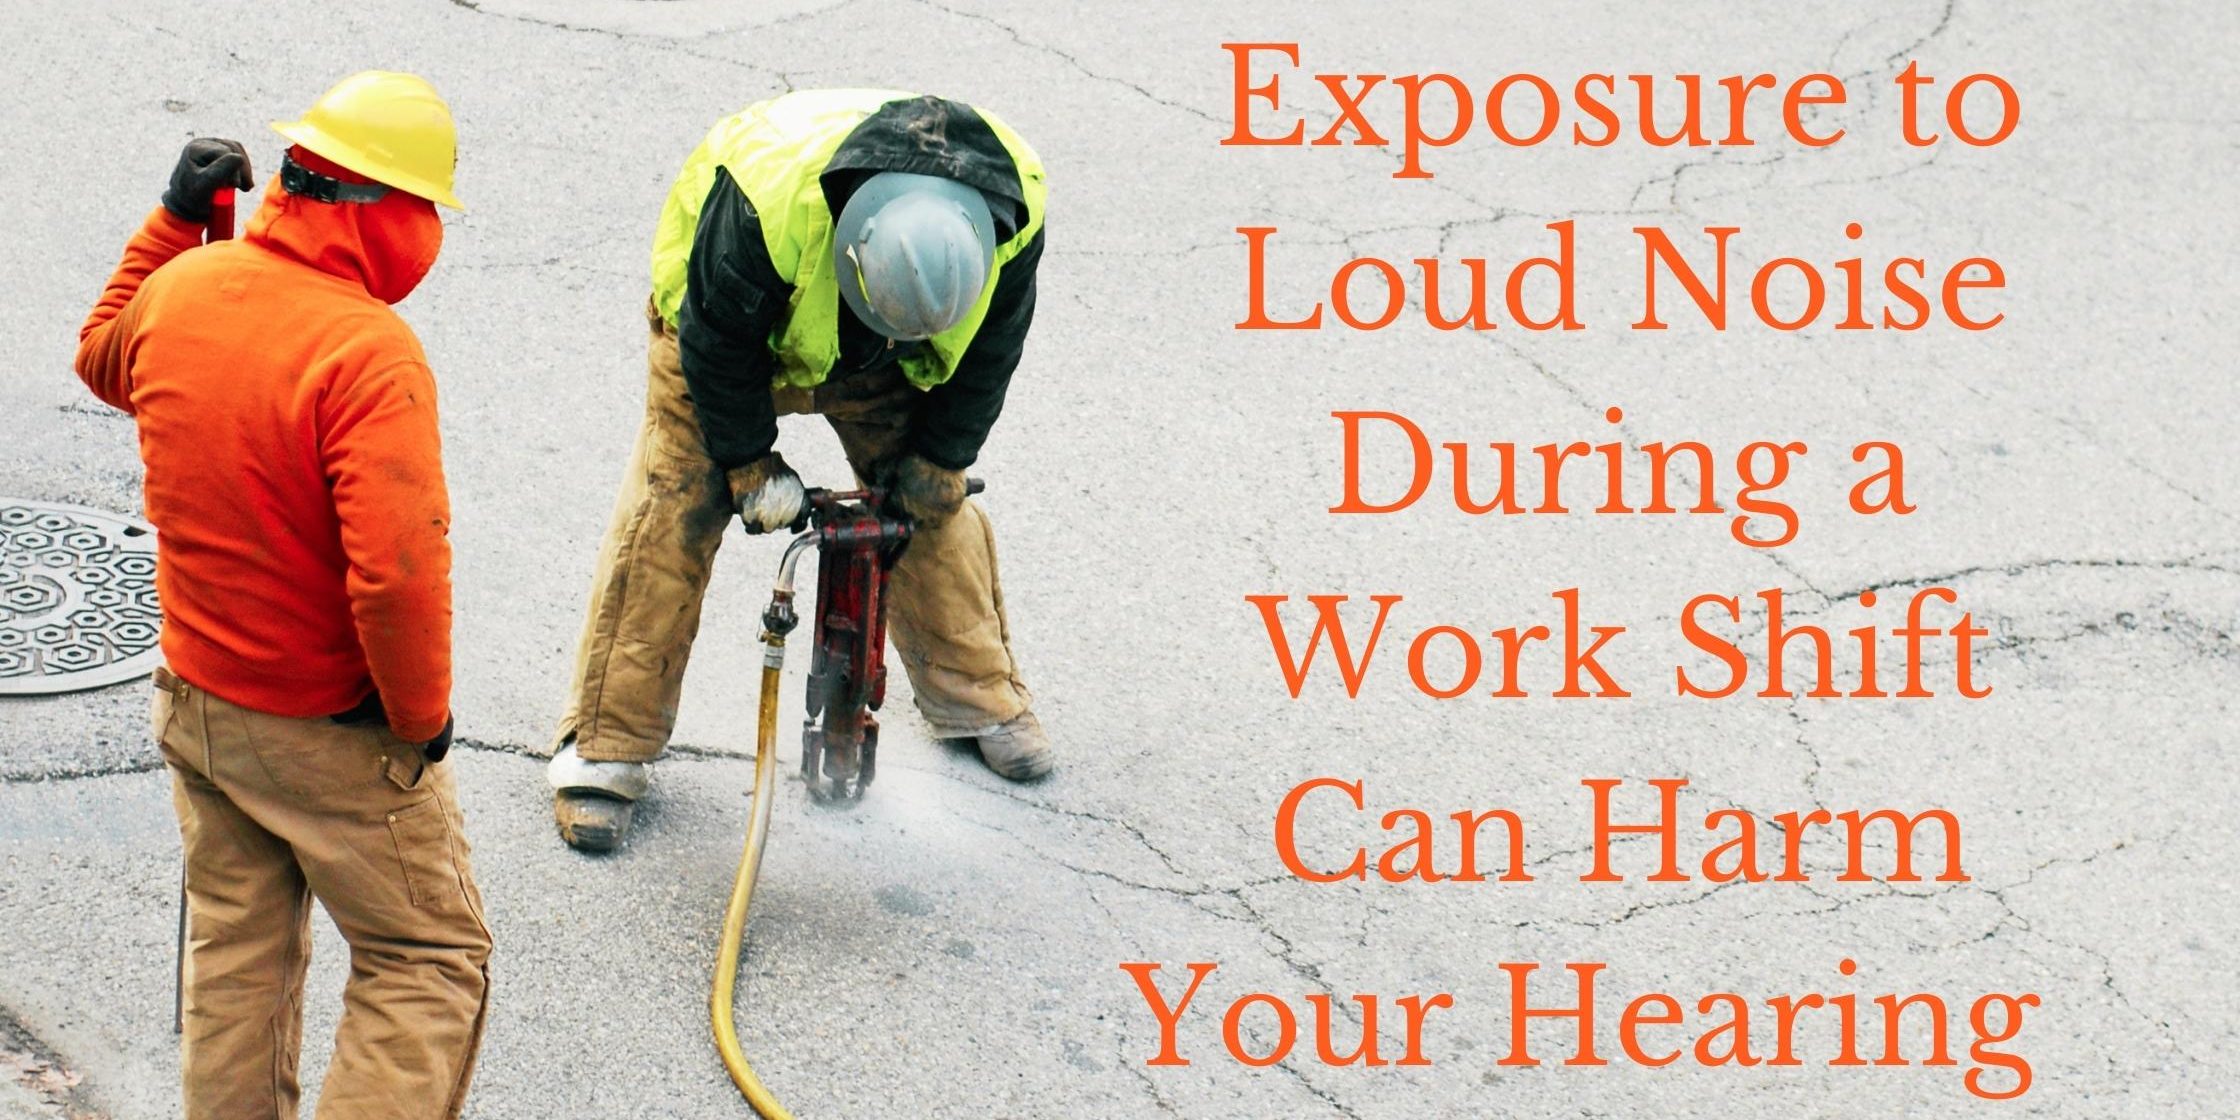 Exposure to Loud Noise During a Work Shift Can Harm Your Hearing